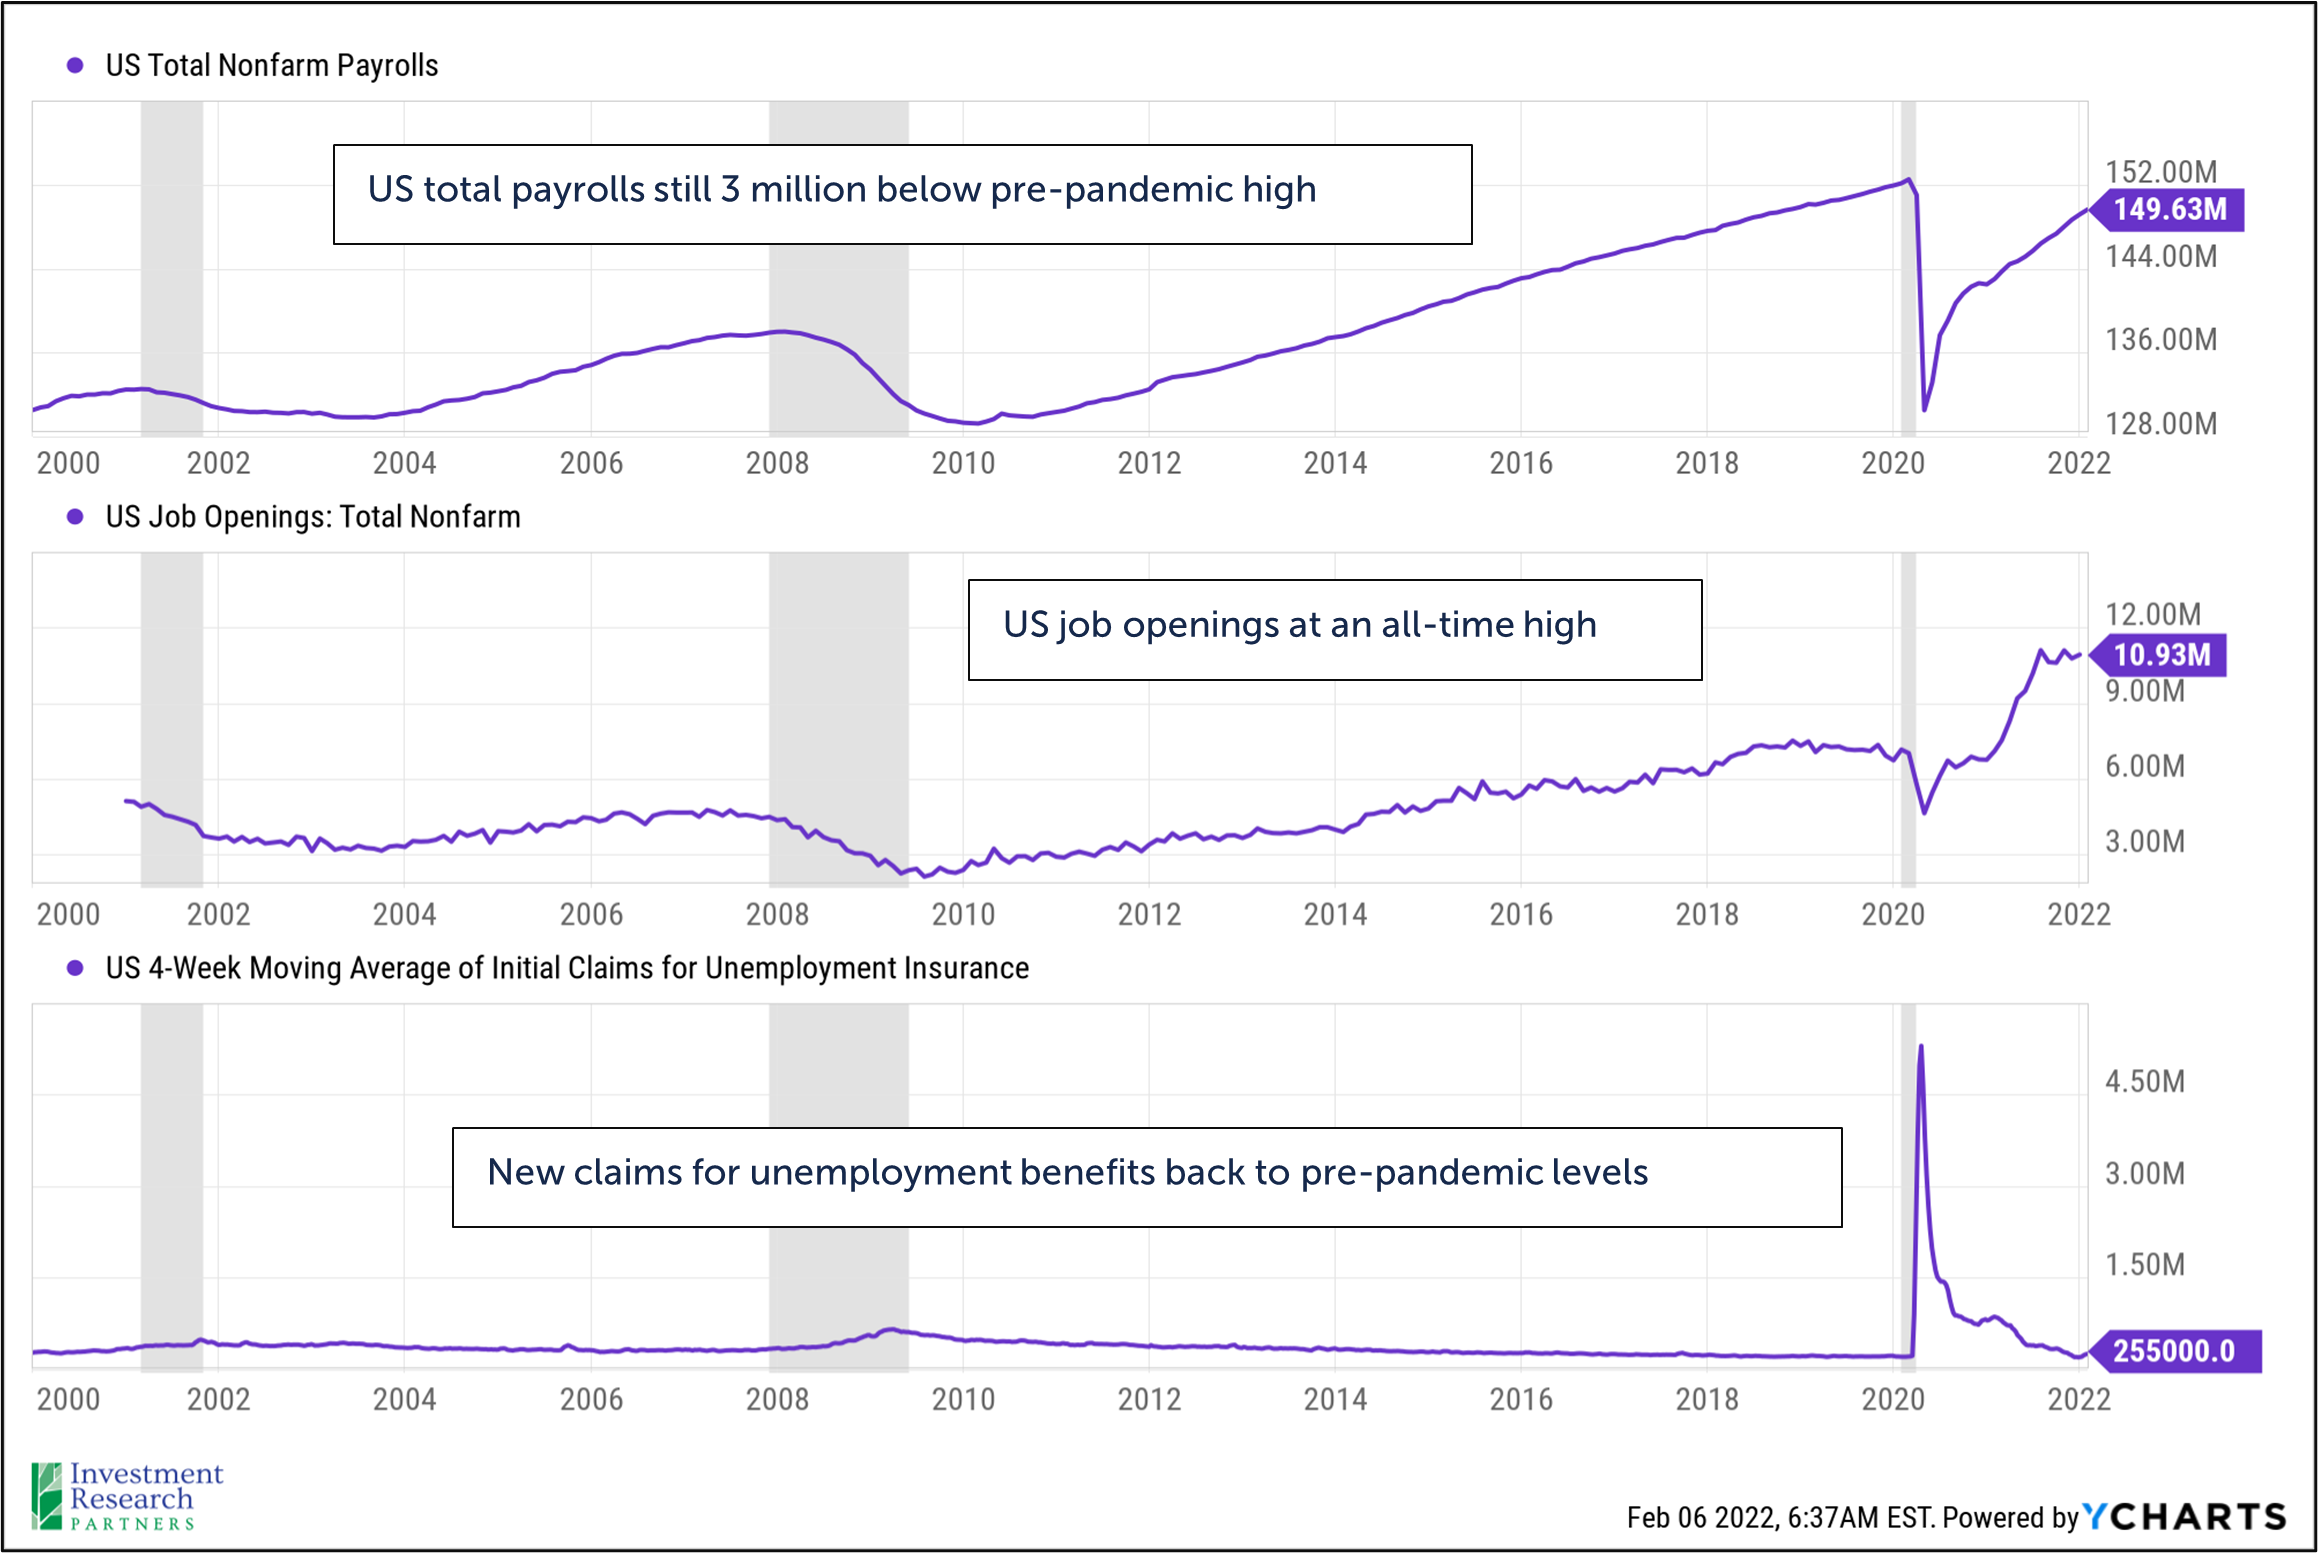 Line graphs depicting US Total Nonfarm Payrolls, US Job Openings: Total Nonfarm, and US 4-Week Moving Average of Initial Claims for Unemployment Insurance